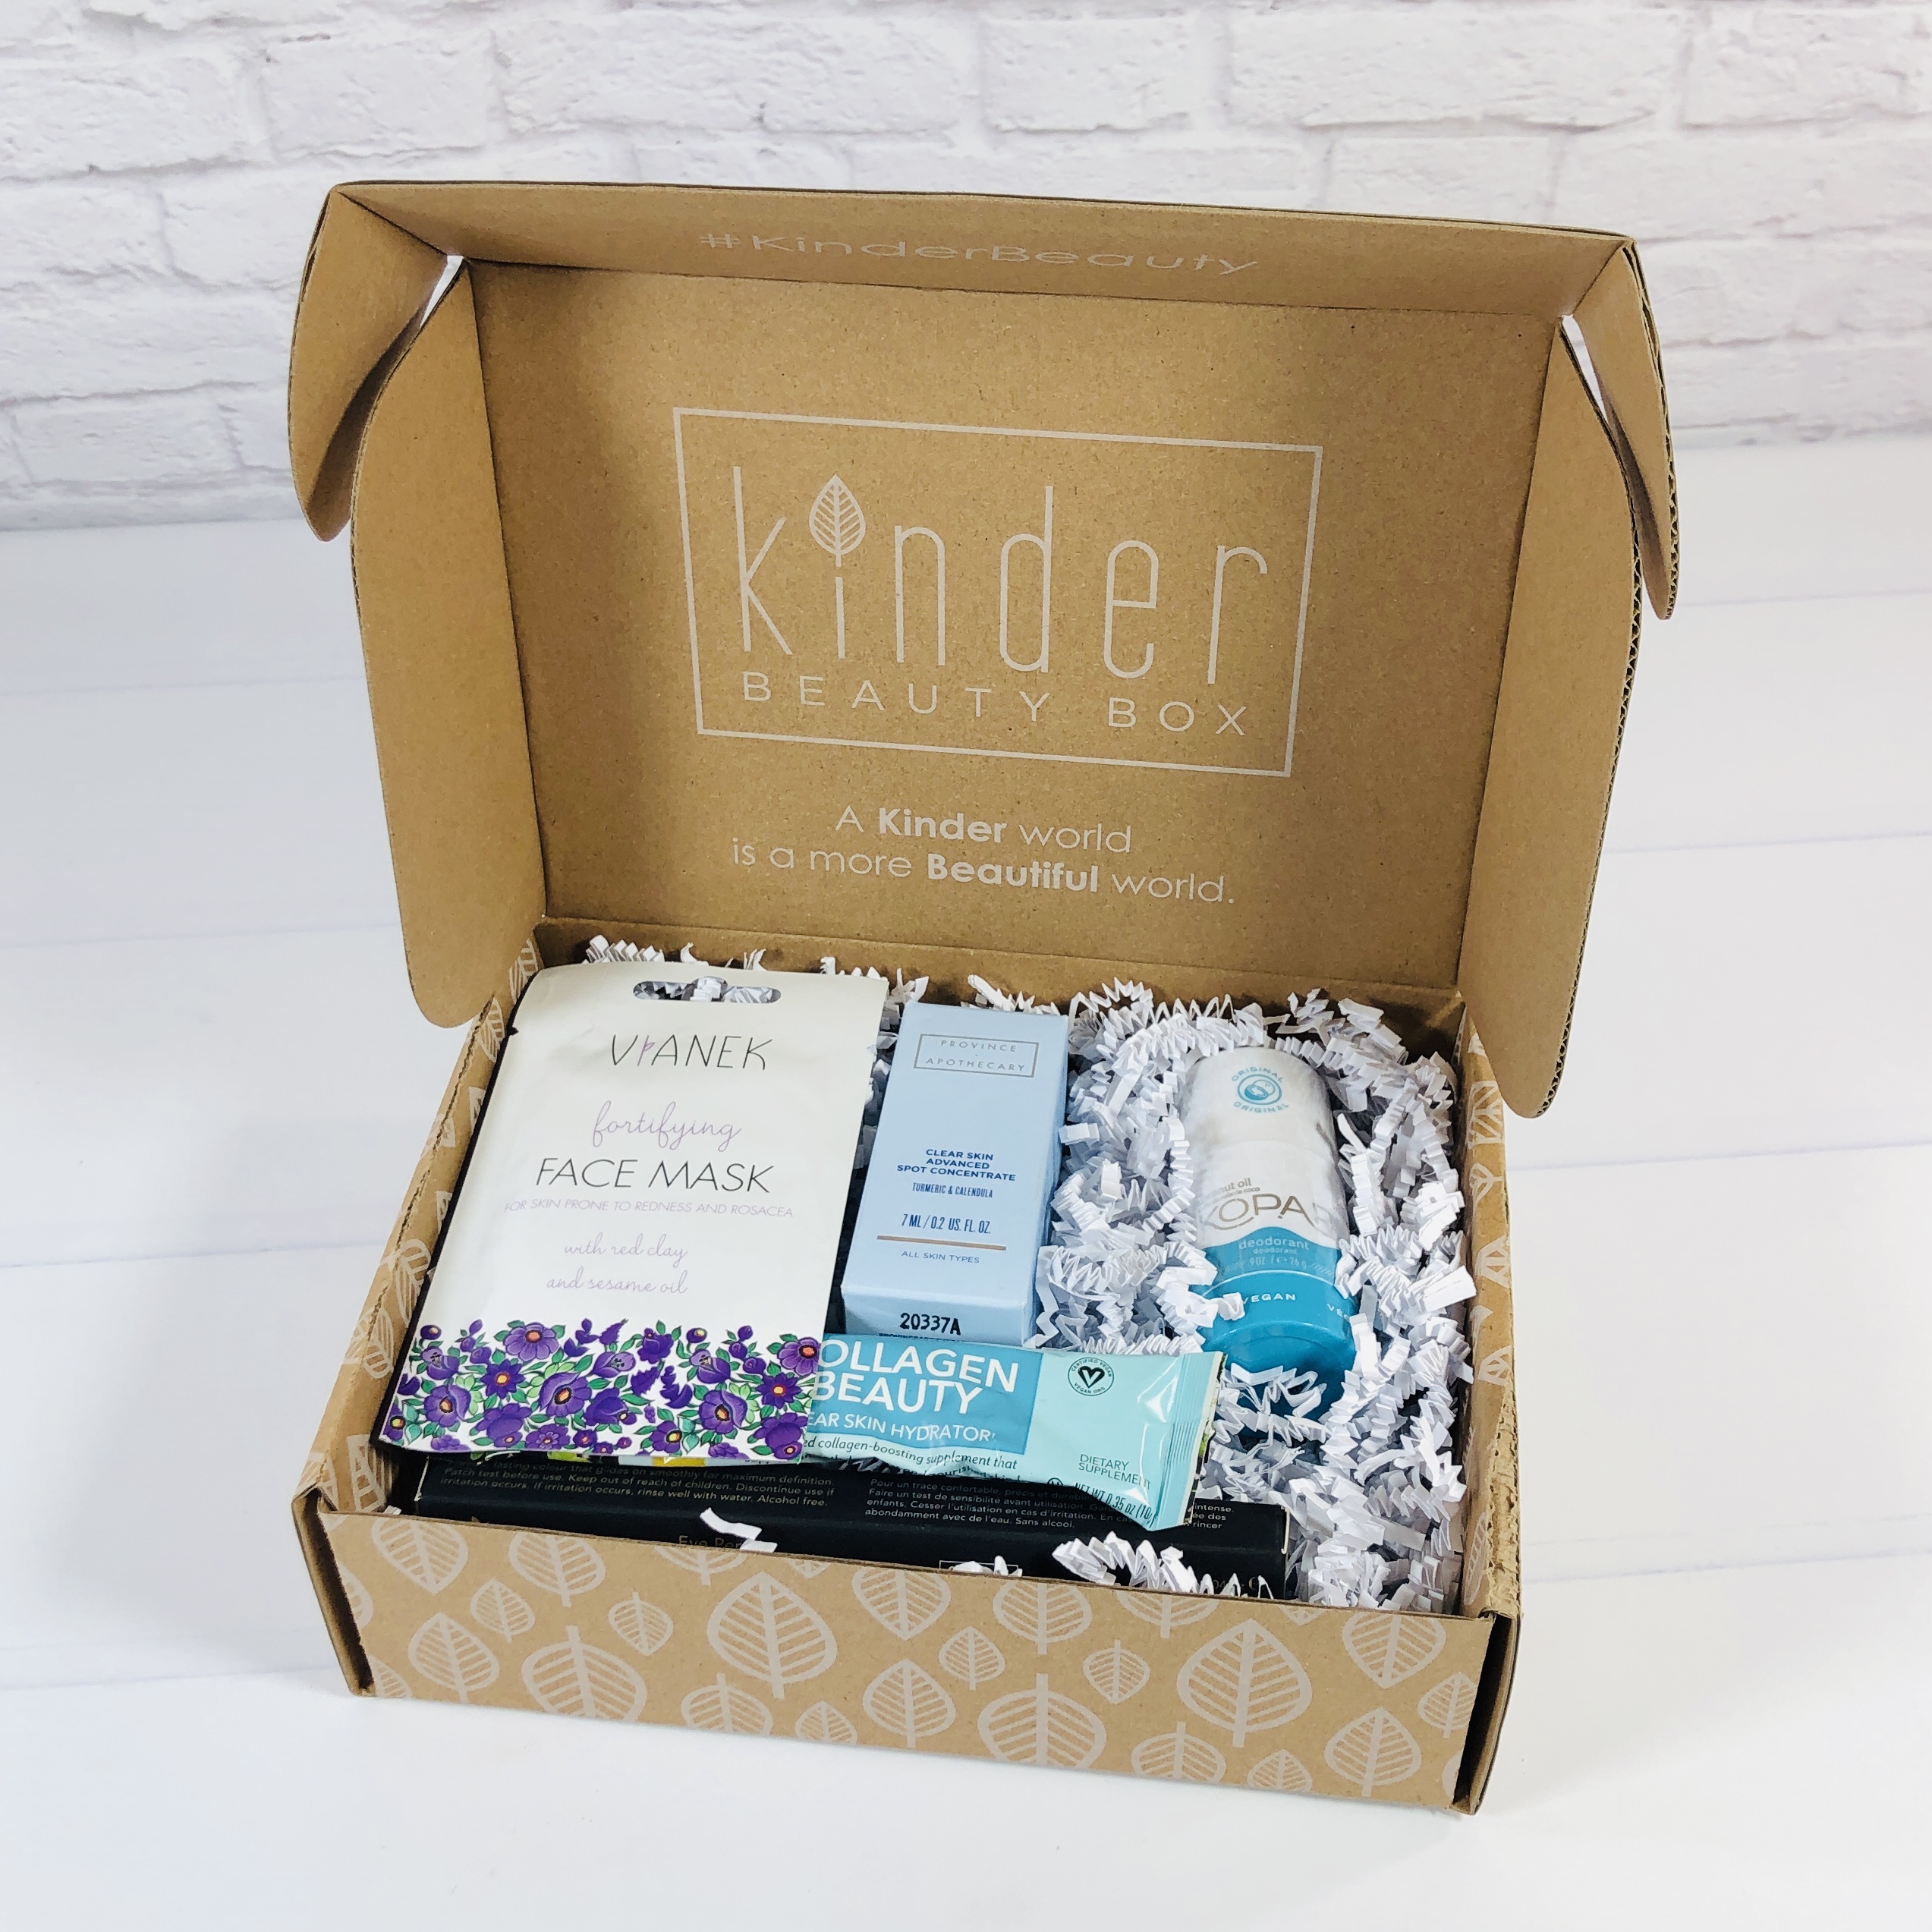 Kinder Beauty Box January 2021 Review Coupon Tlc2021 Hello Subscription